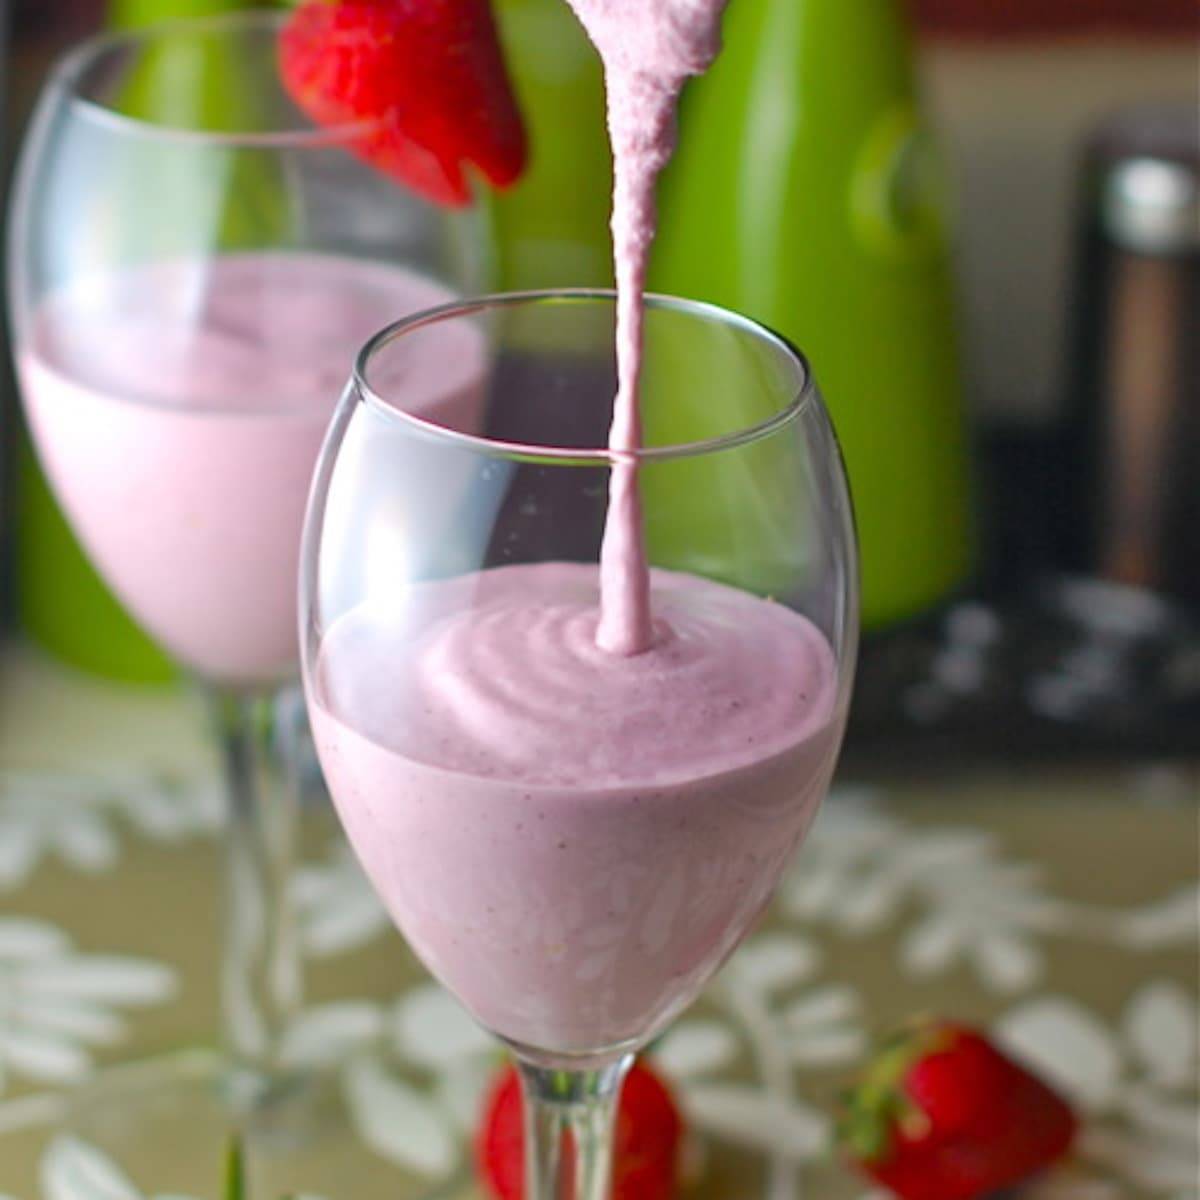 Lemon berry smoothie in a glass with smoothie drizzle.